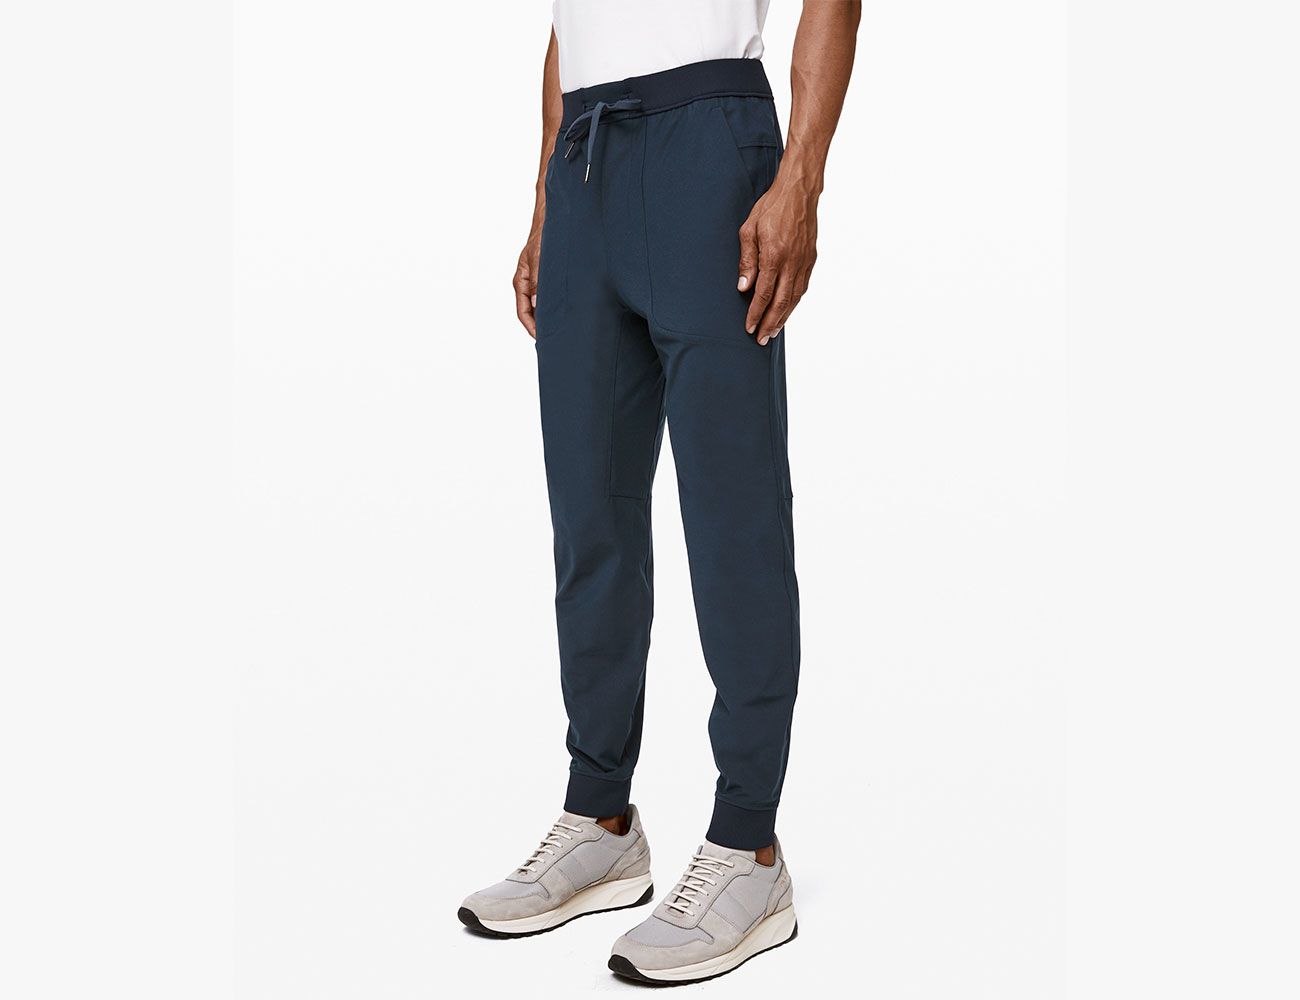 ABC Jogger Is the Perfect Summer Pant